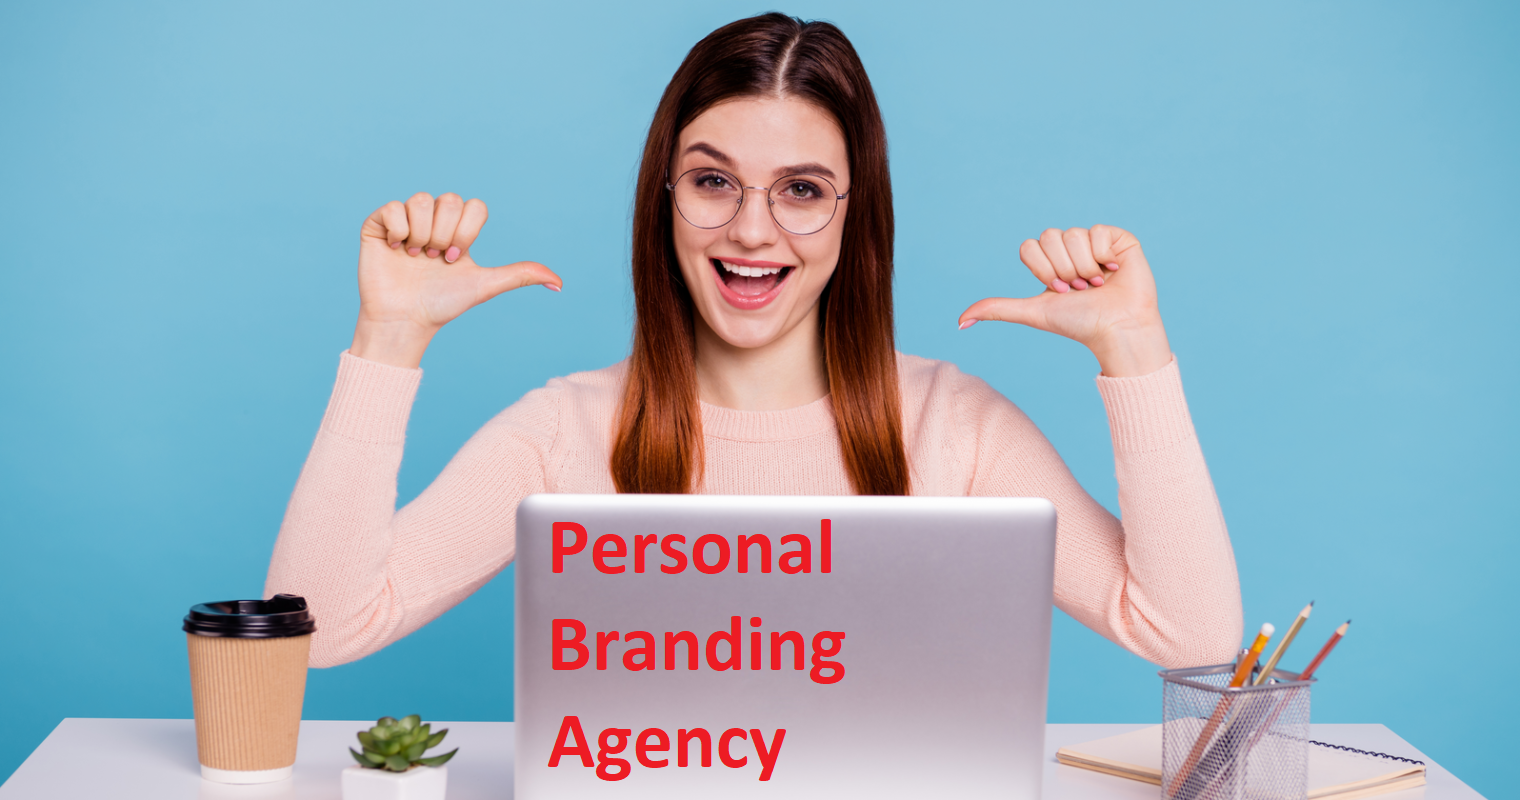 Use Personal Branding to Grow Your Business Faster